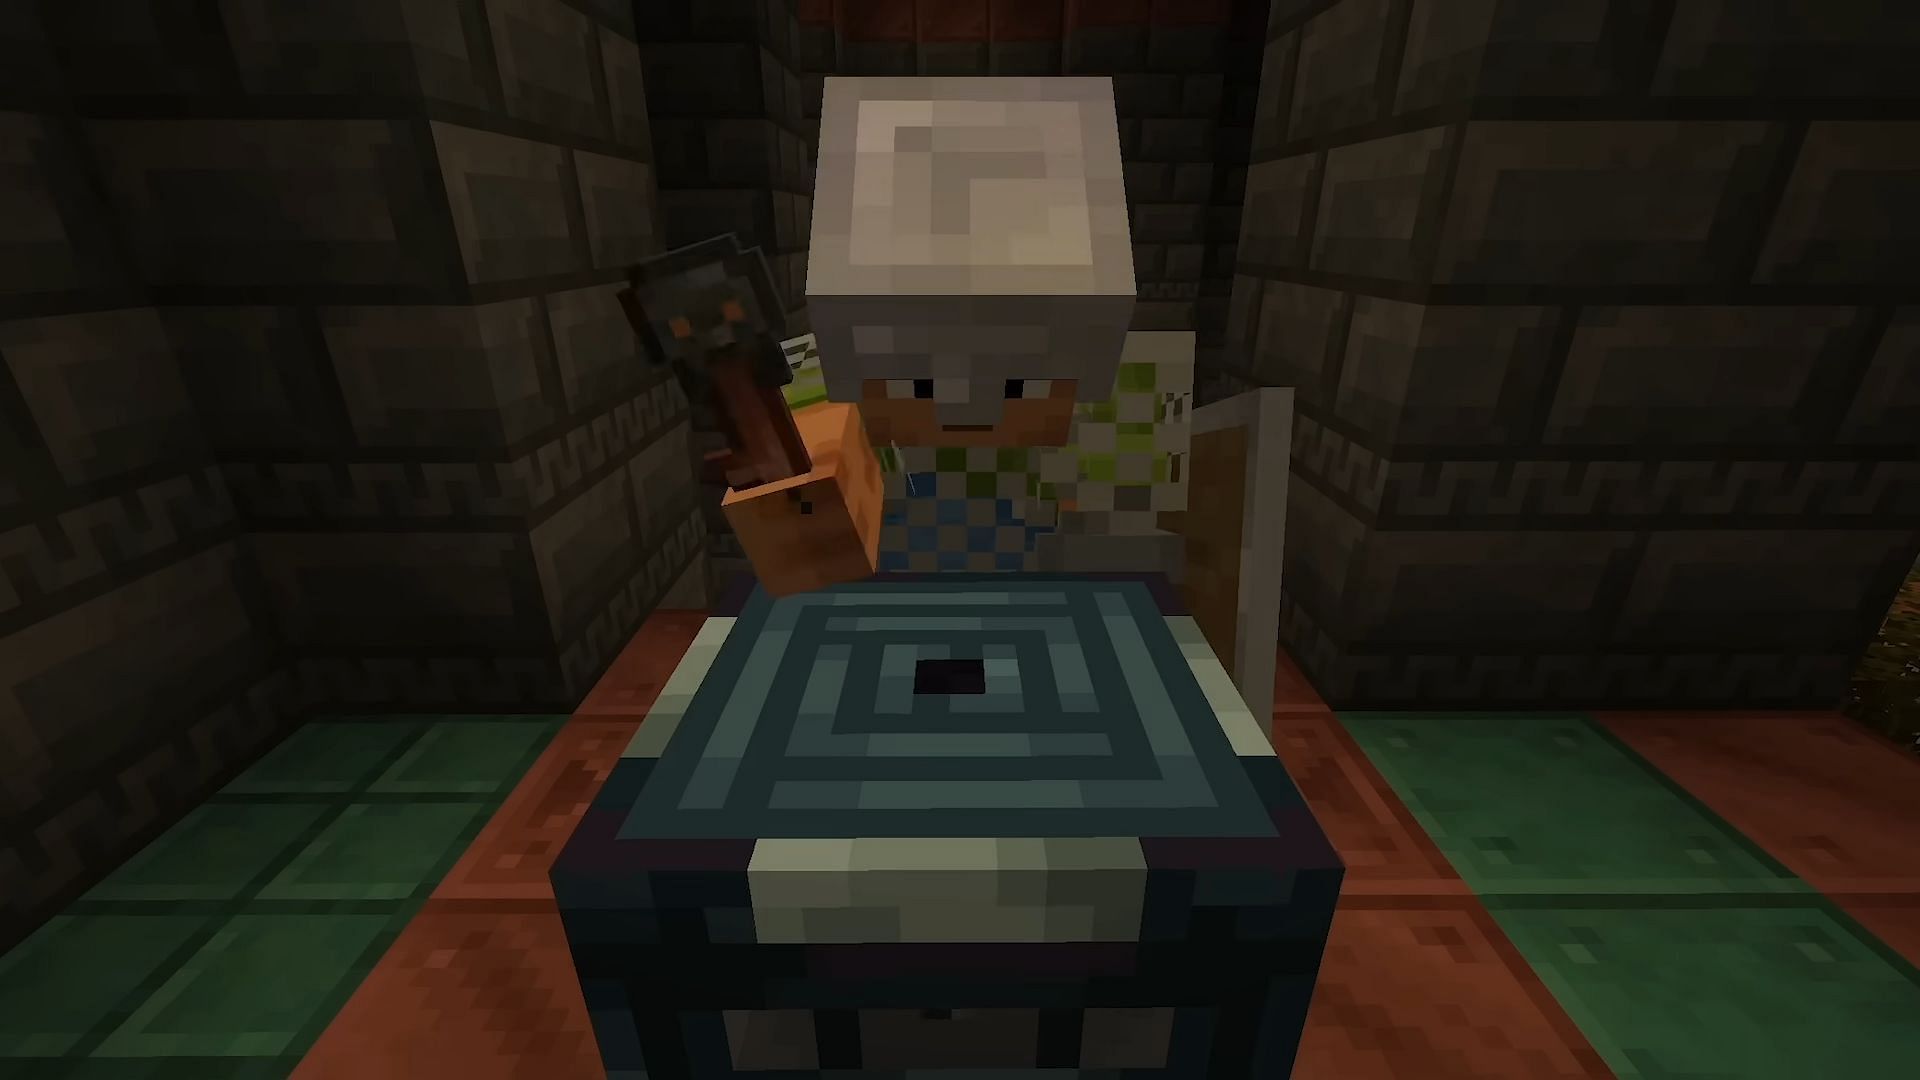 A Minecraft player uses a trial key to open a vault block (Image via Mojang)